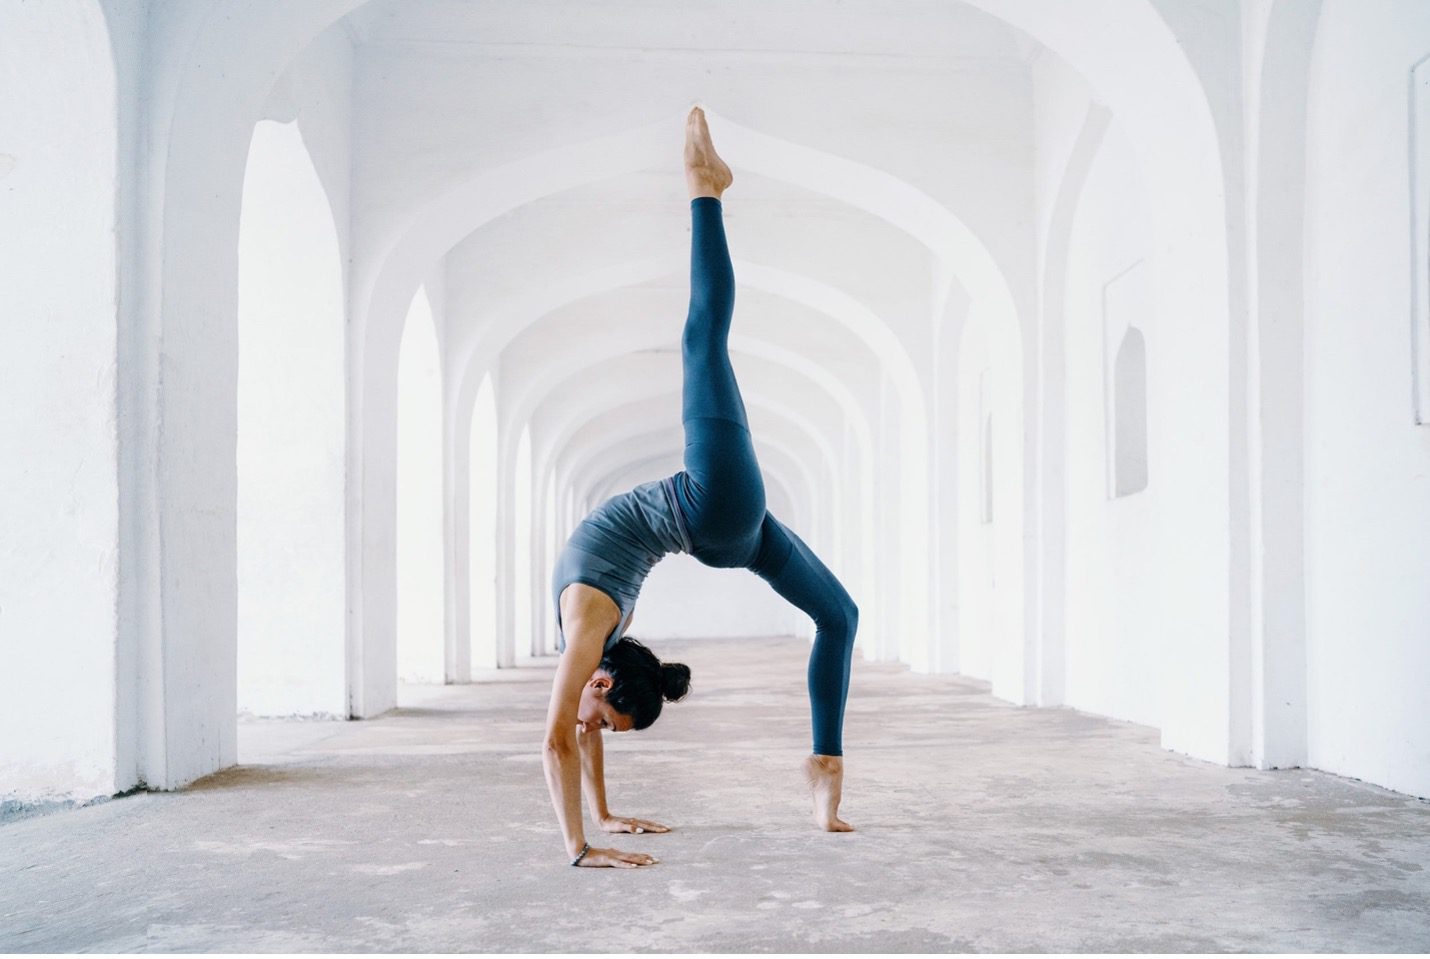 Woman doing a yoga backbend in a hallway of white arches represents the WELL movement concept